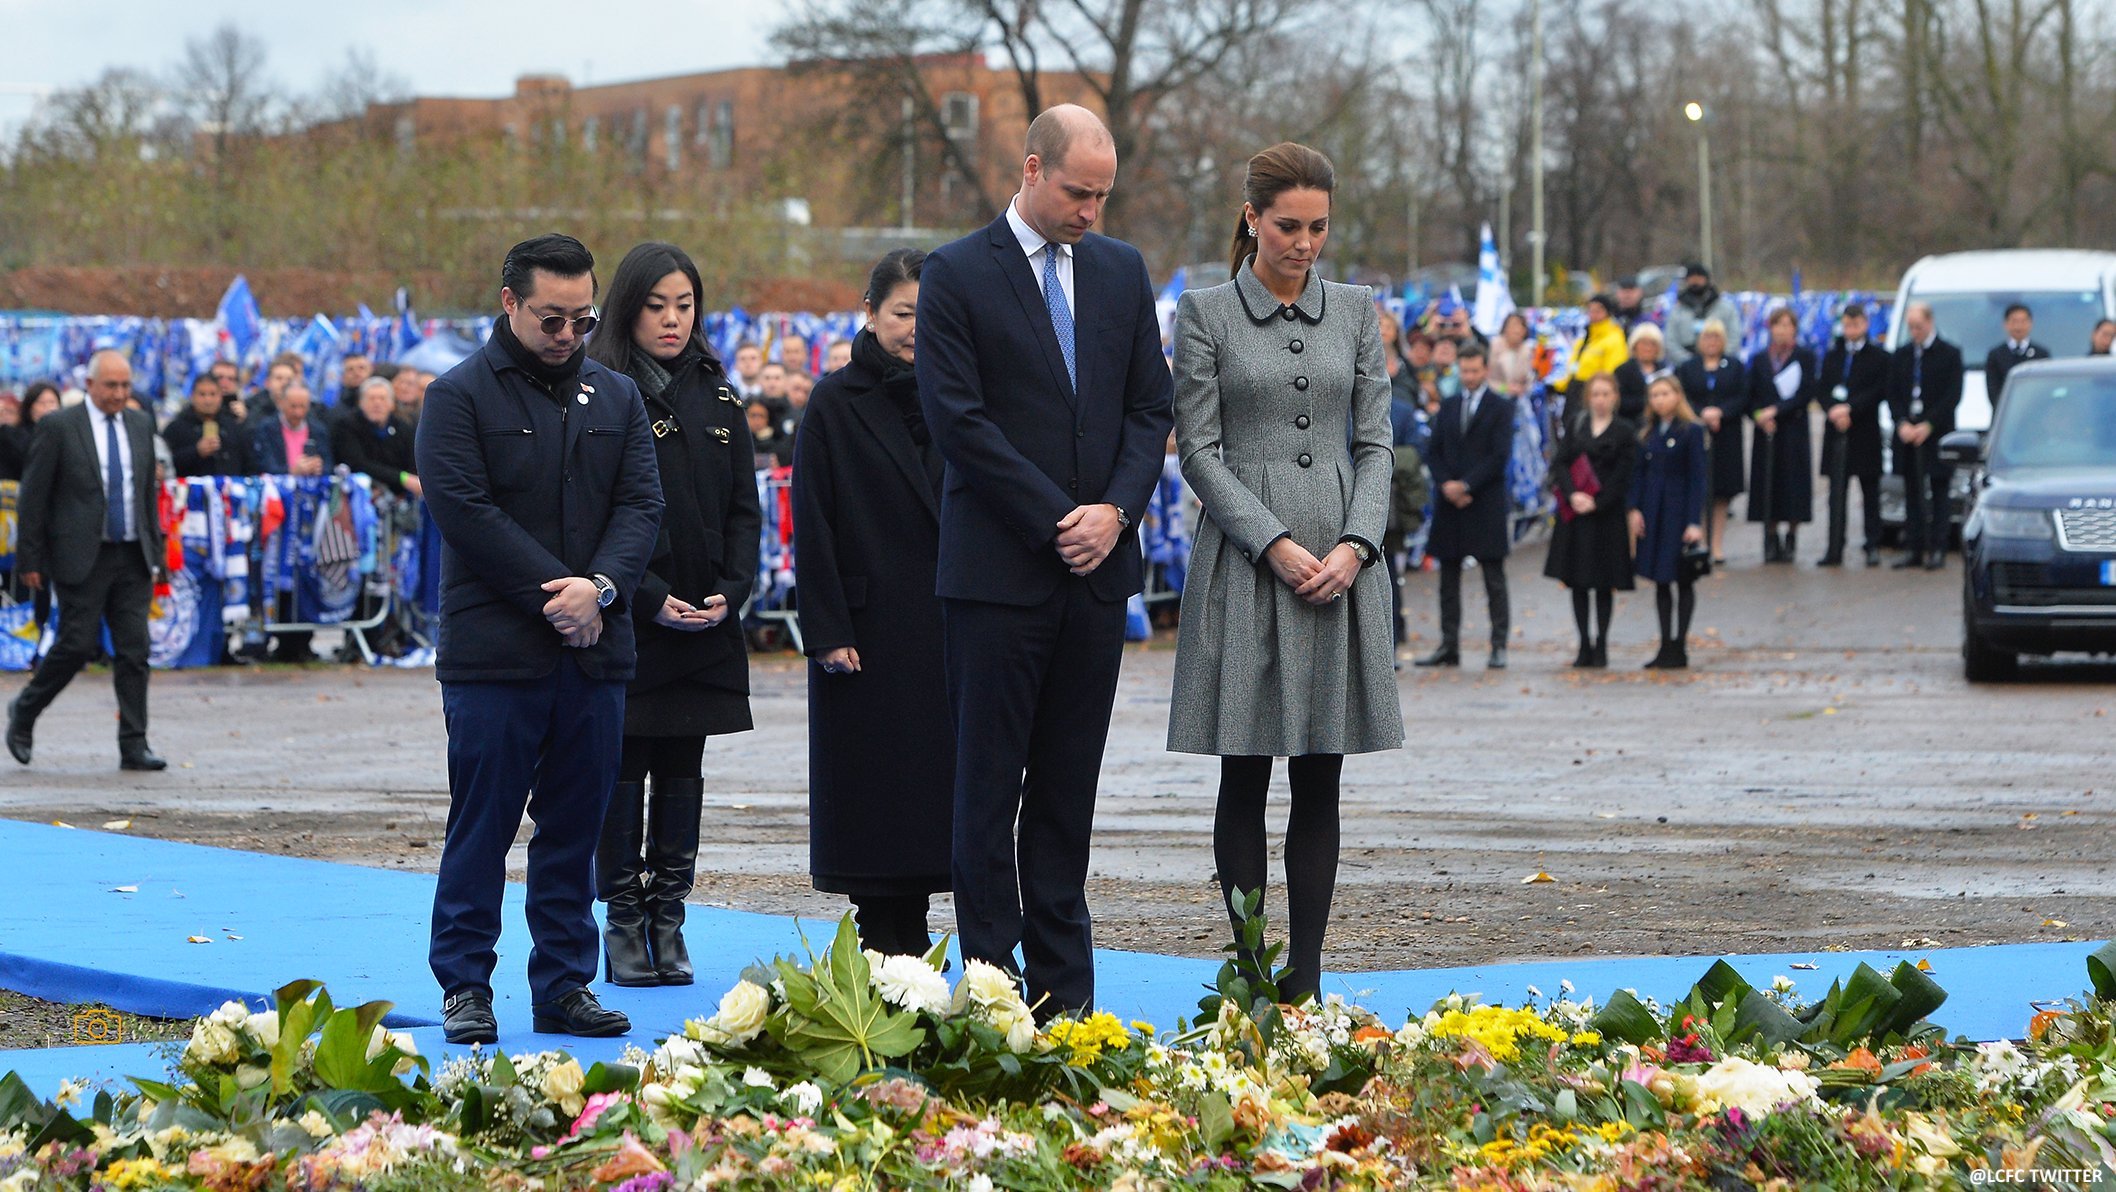 William and Kate visiting the Leicester City Football Club memorial in 2018